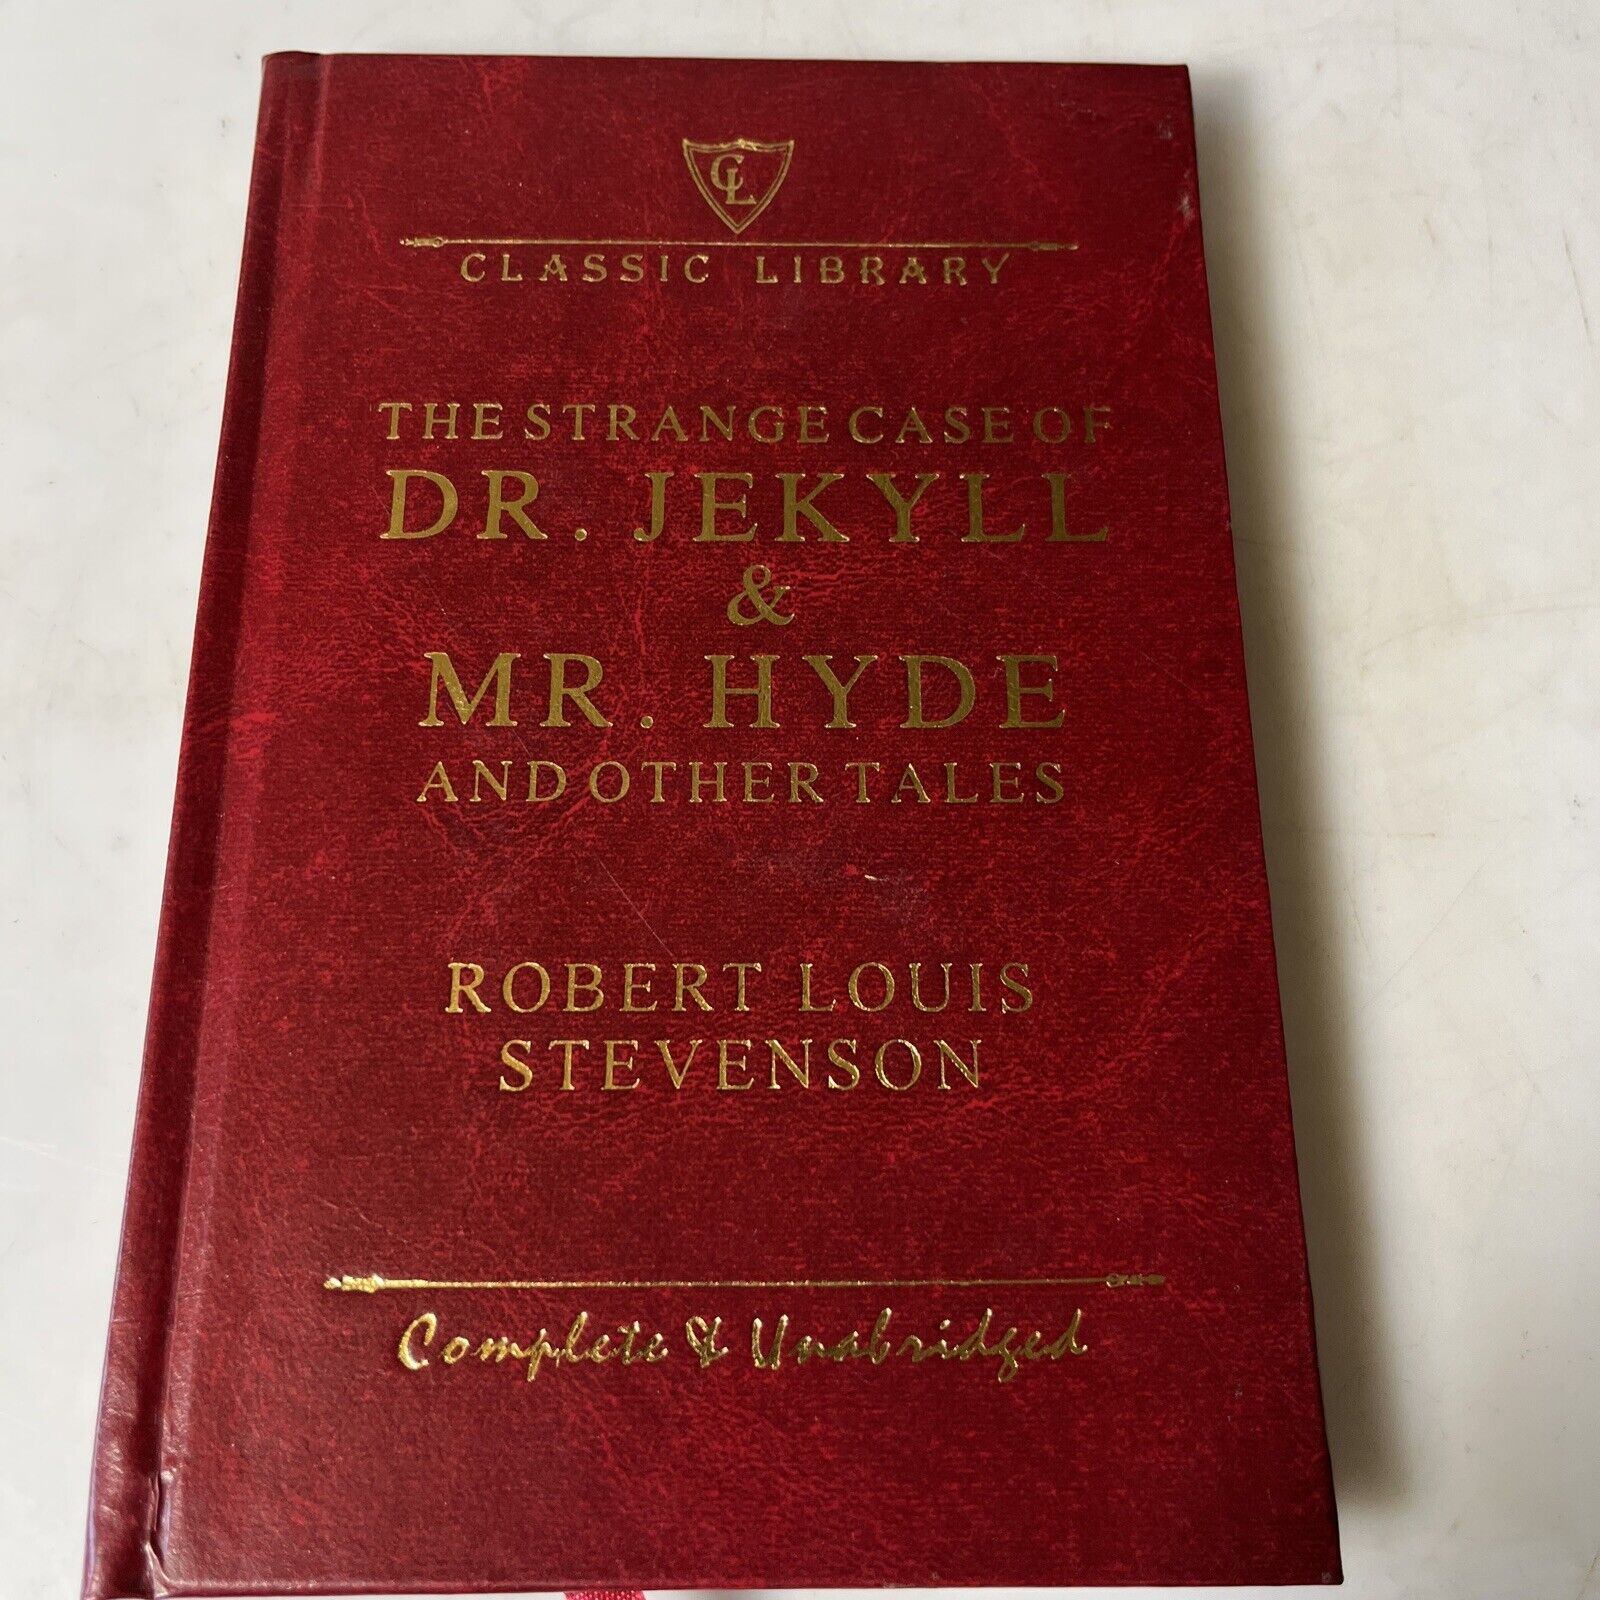 The Strange Case of Dr. Jekyll   Mr. Hyde and Other Tales Complete Unabridged